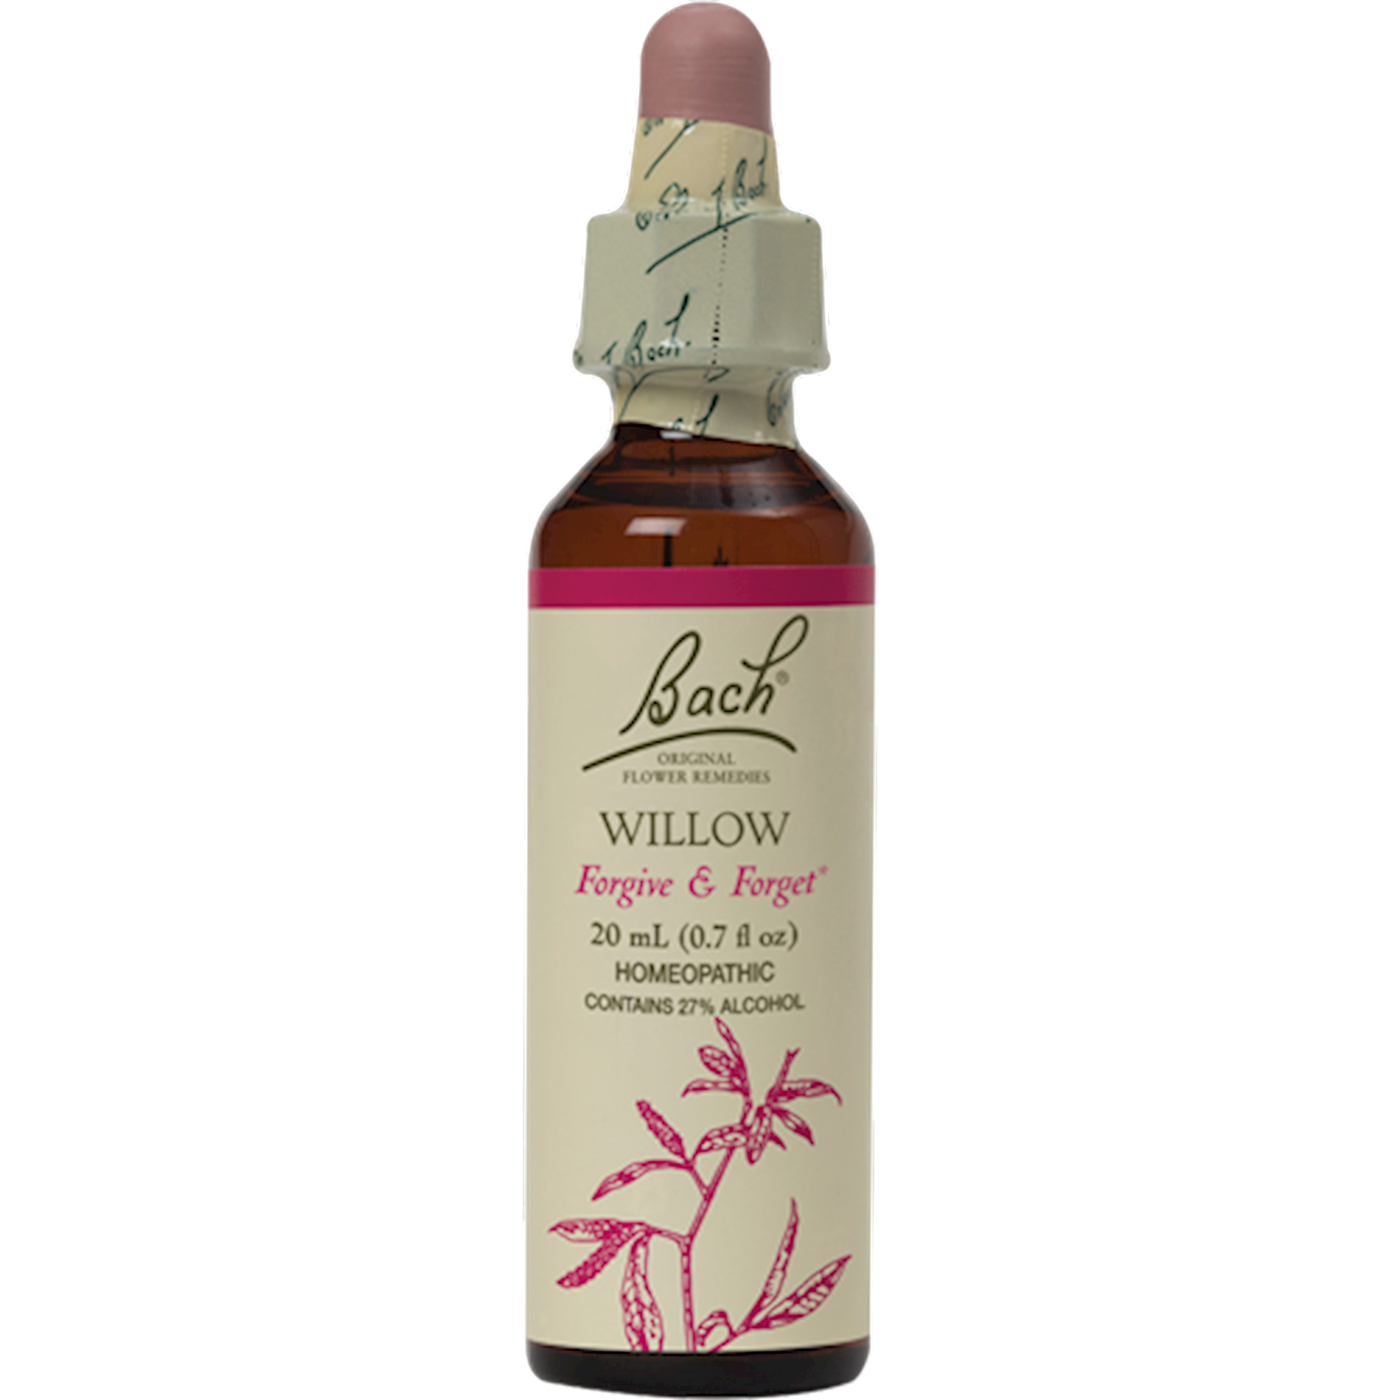 Willow Flower Essence  Curated Wellness